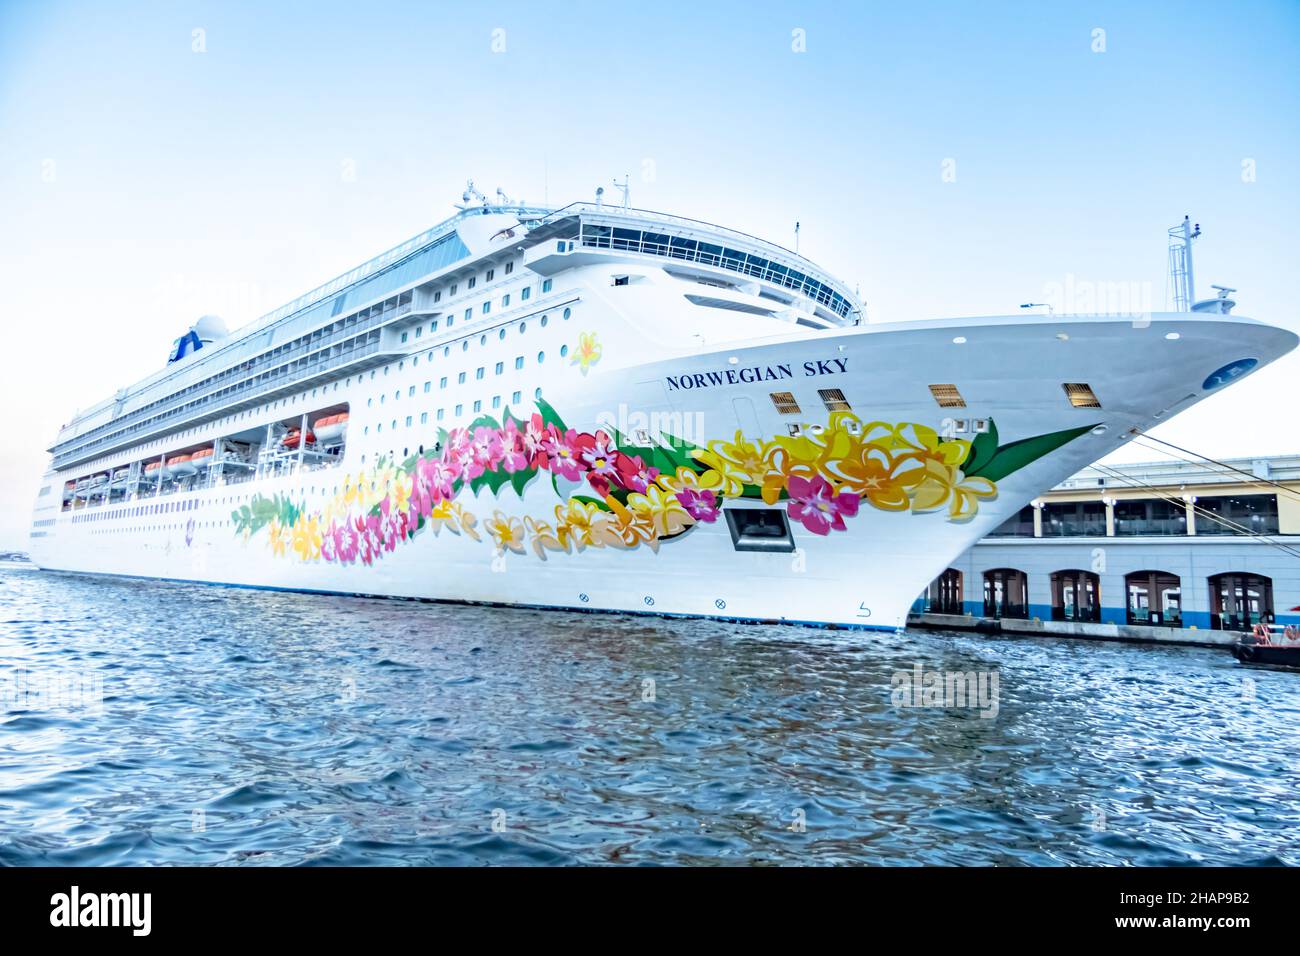 White Norwegian Sky cruise ship with yellow and pink flowers painted on the bow, docked at port in Cuba. Stock Photo